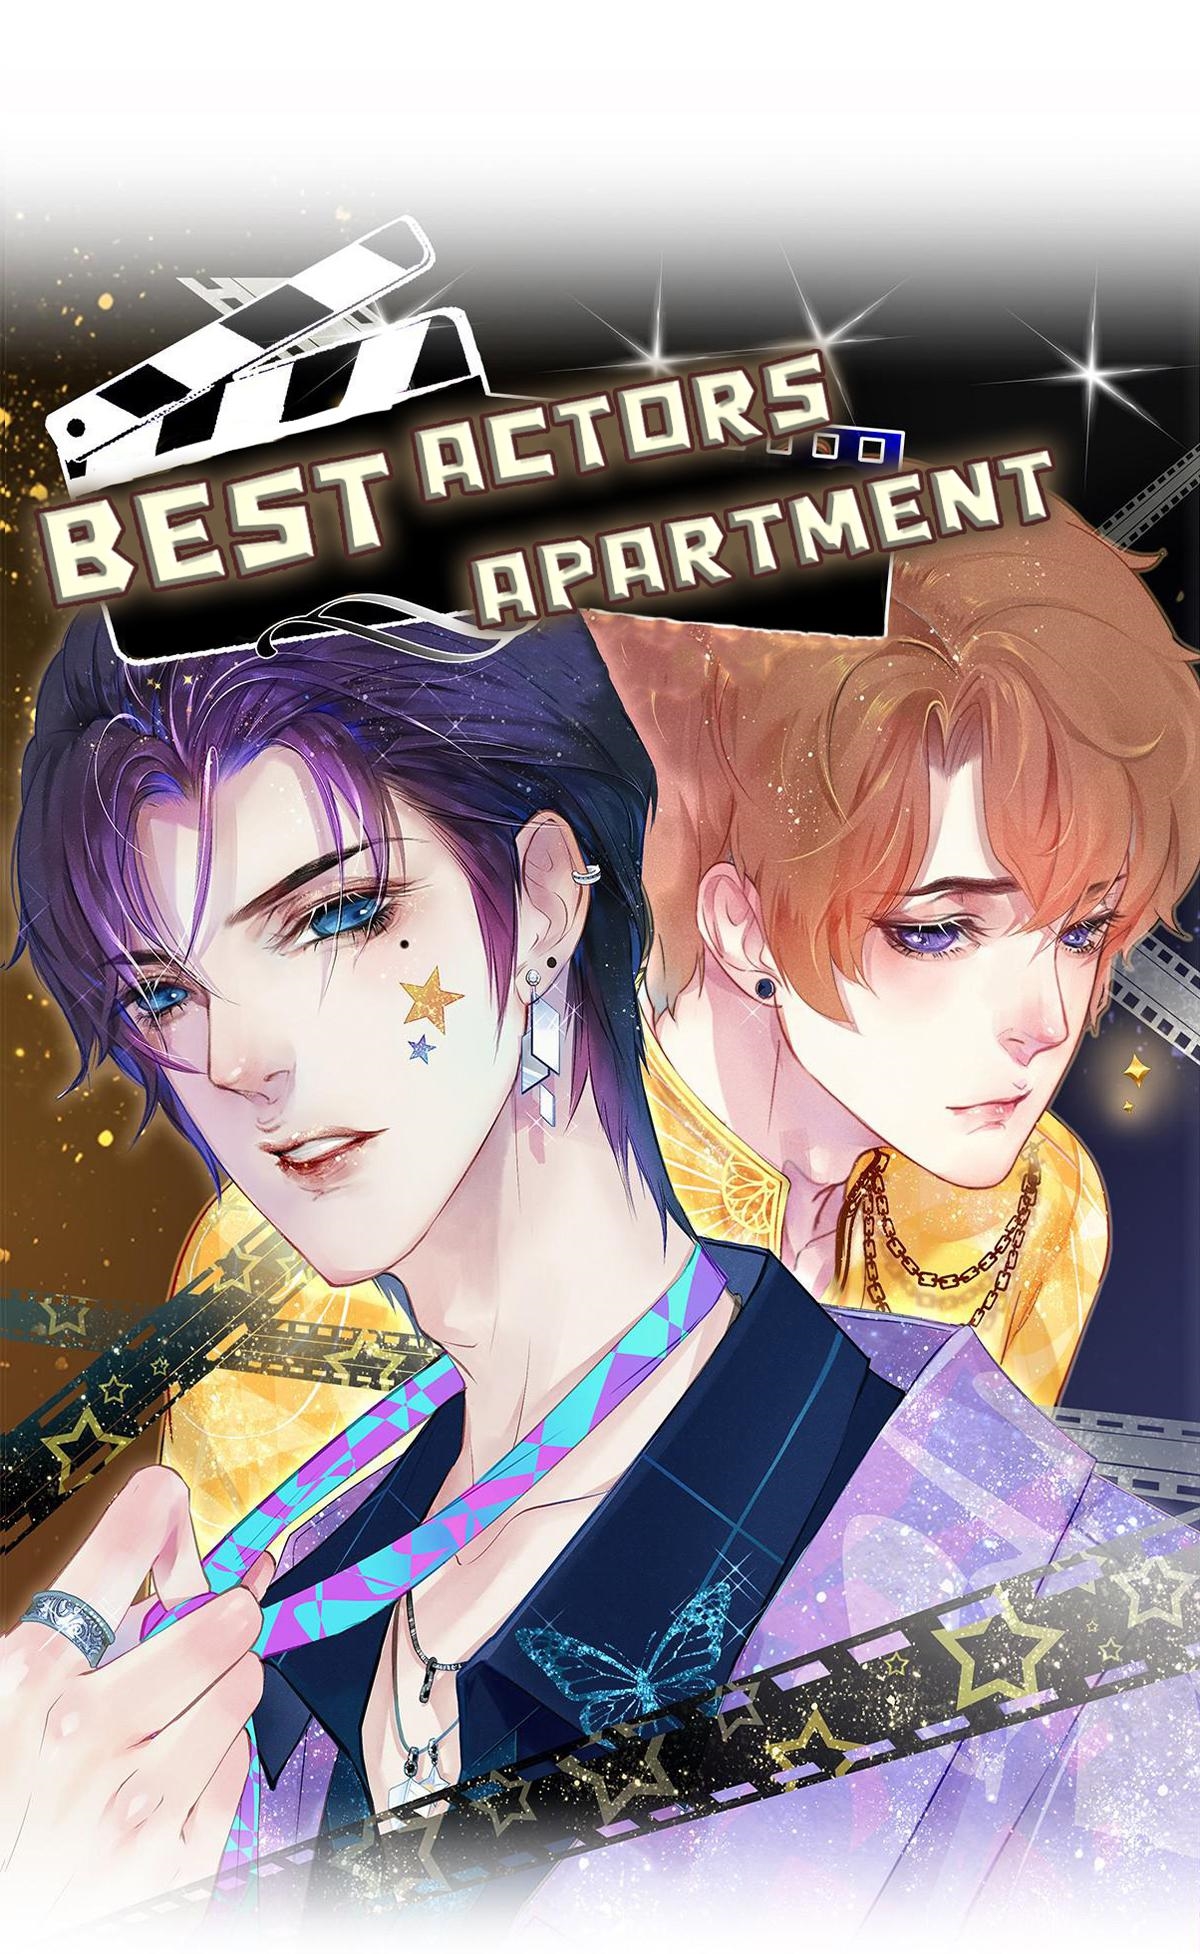 Best Actors Apartment Chapter 13: Ruse Of Self Injury - Picture 1